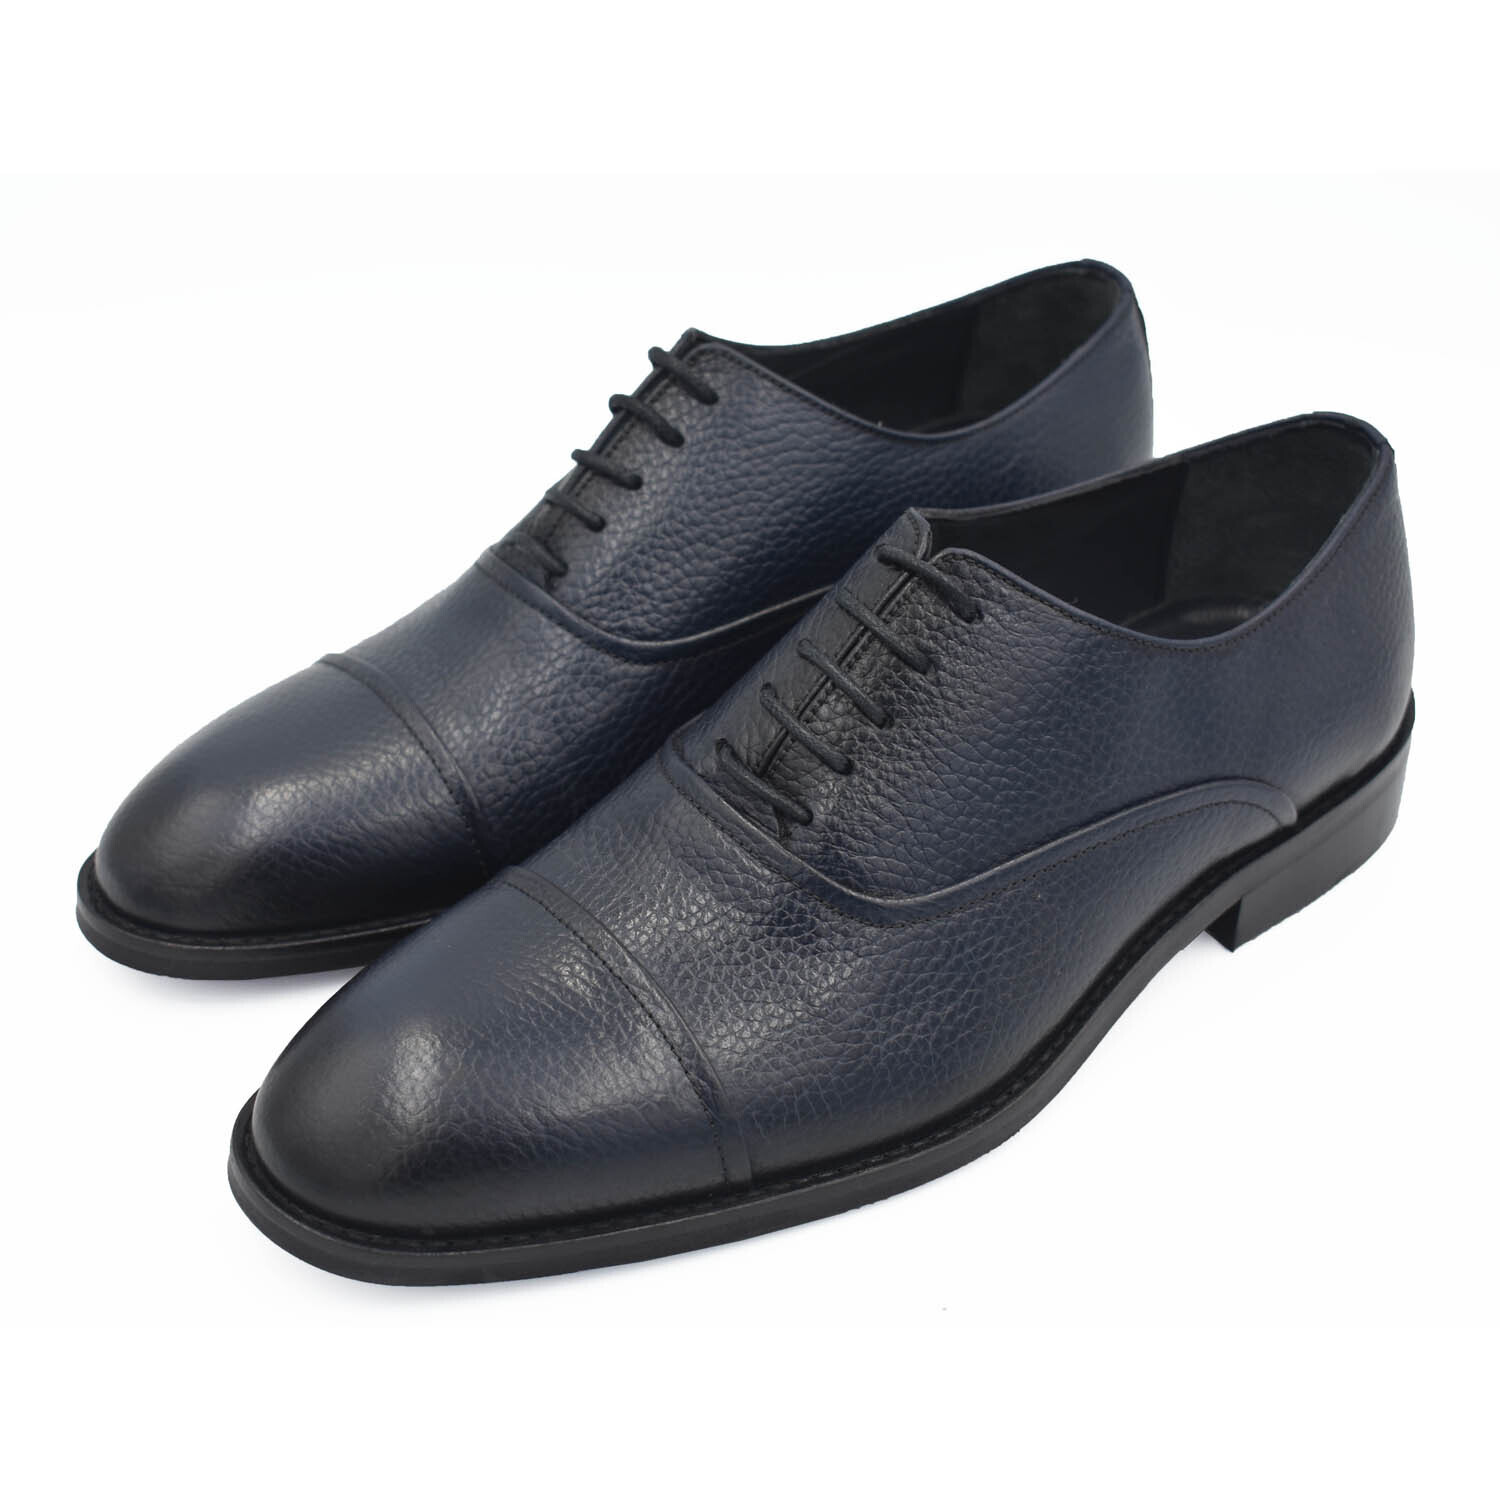 100% pure leather formal shoes for men